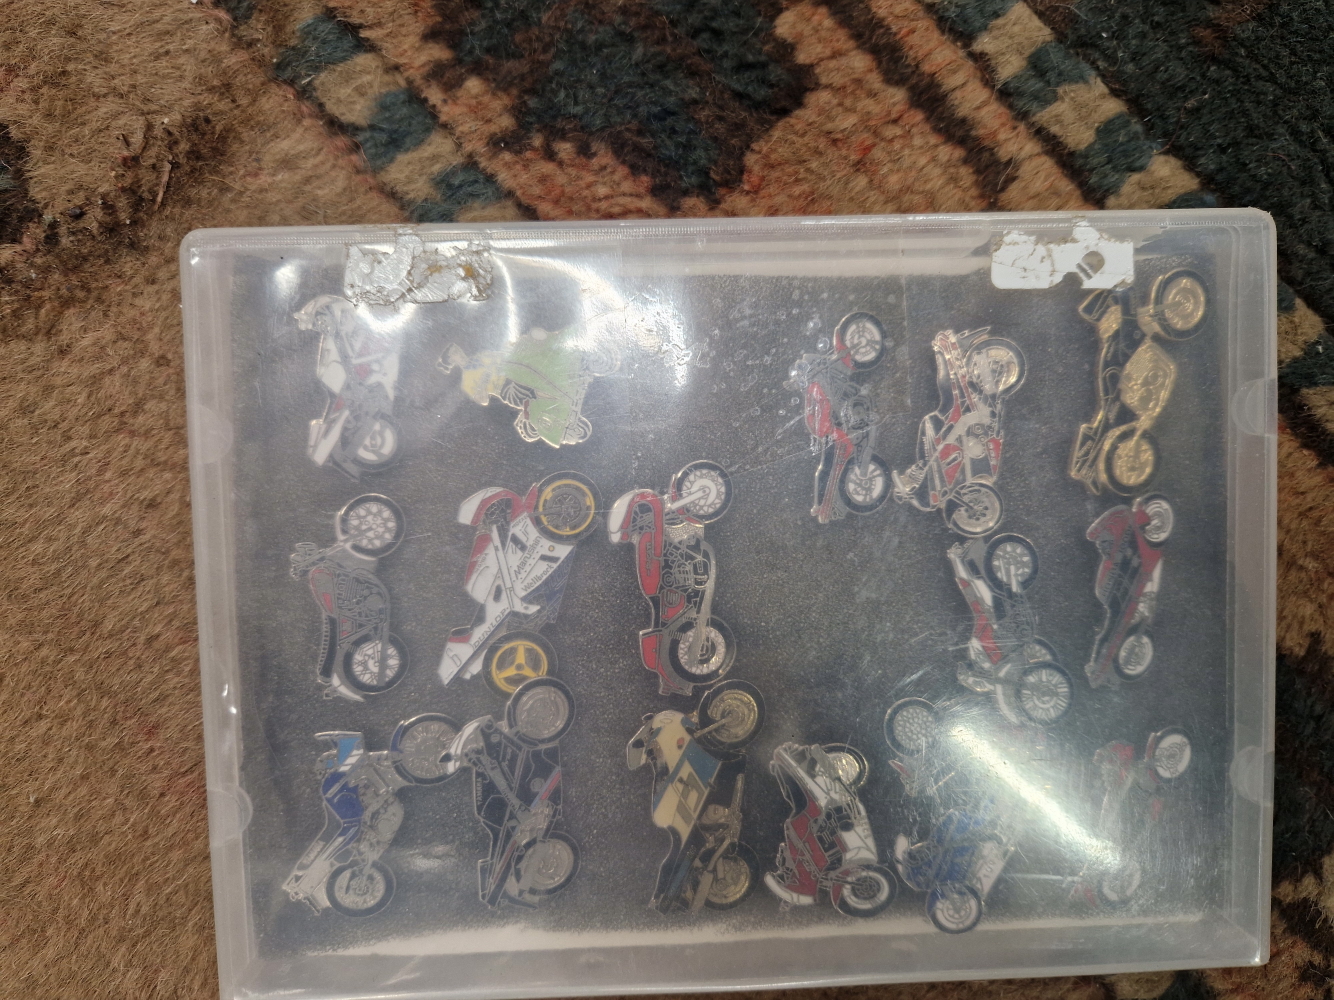 A SMALL COLLECTION OF MOTORCYCLE PIN BADGES.